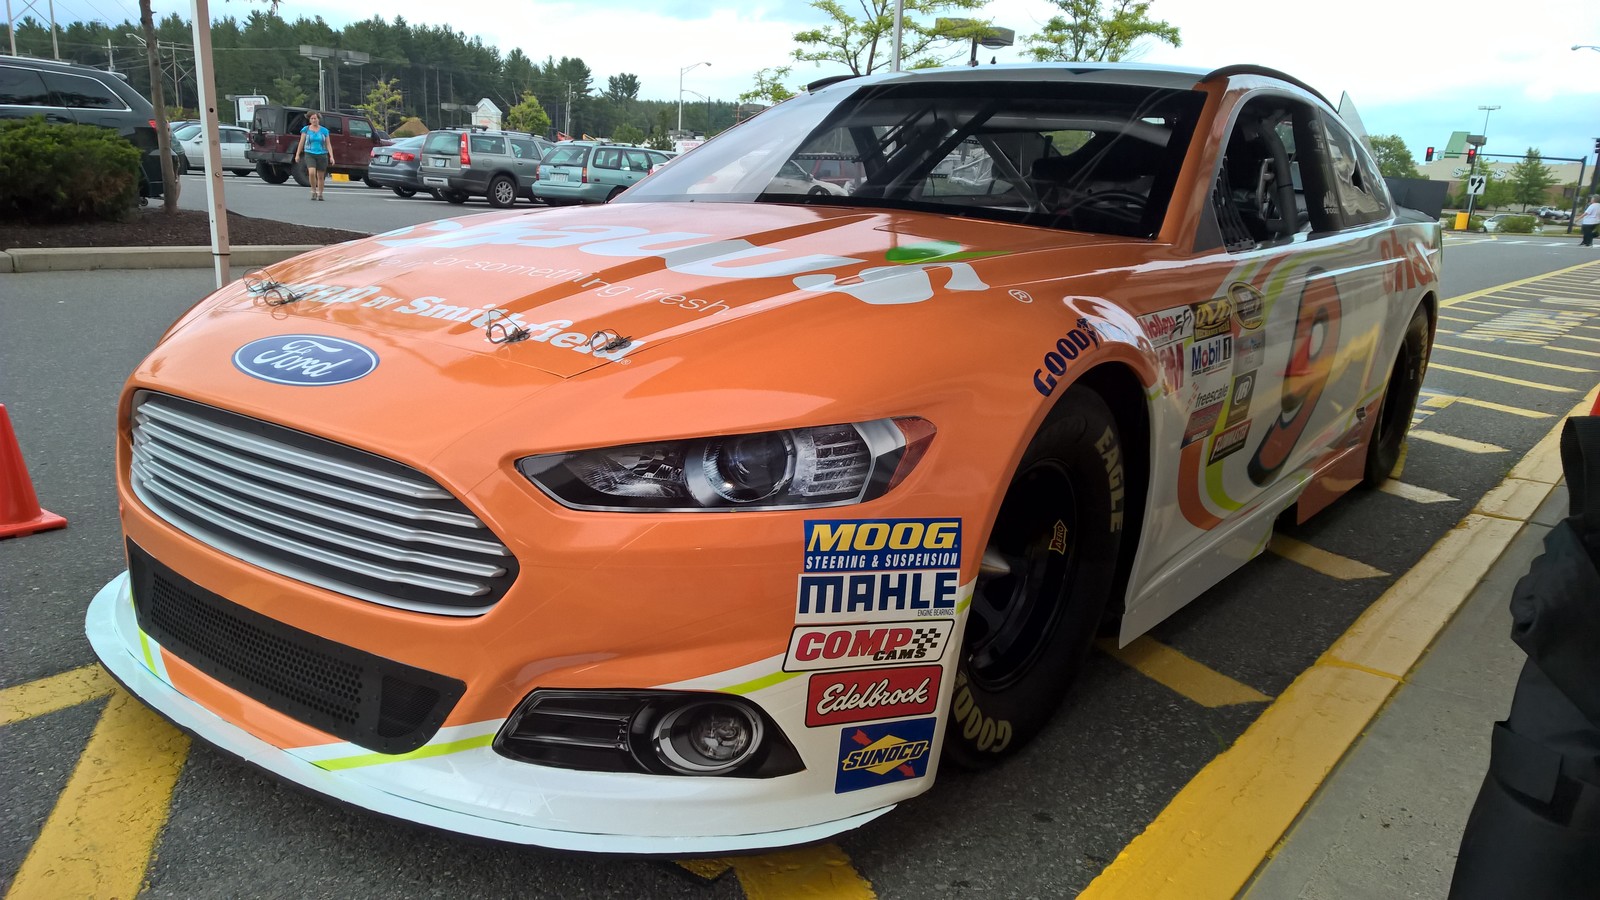 The #9 Shaw's Supermarkets Ford Fusion on display during an appearance event at Shaw's of Concord, New Hampshire on July 18th, 2015.